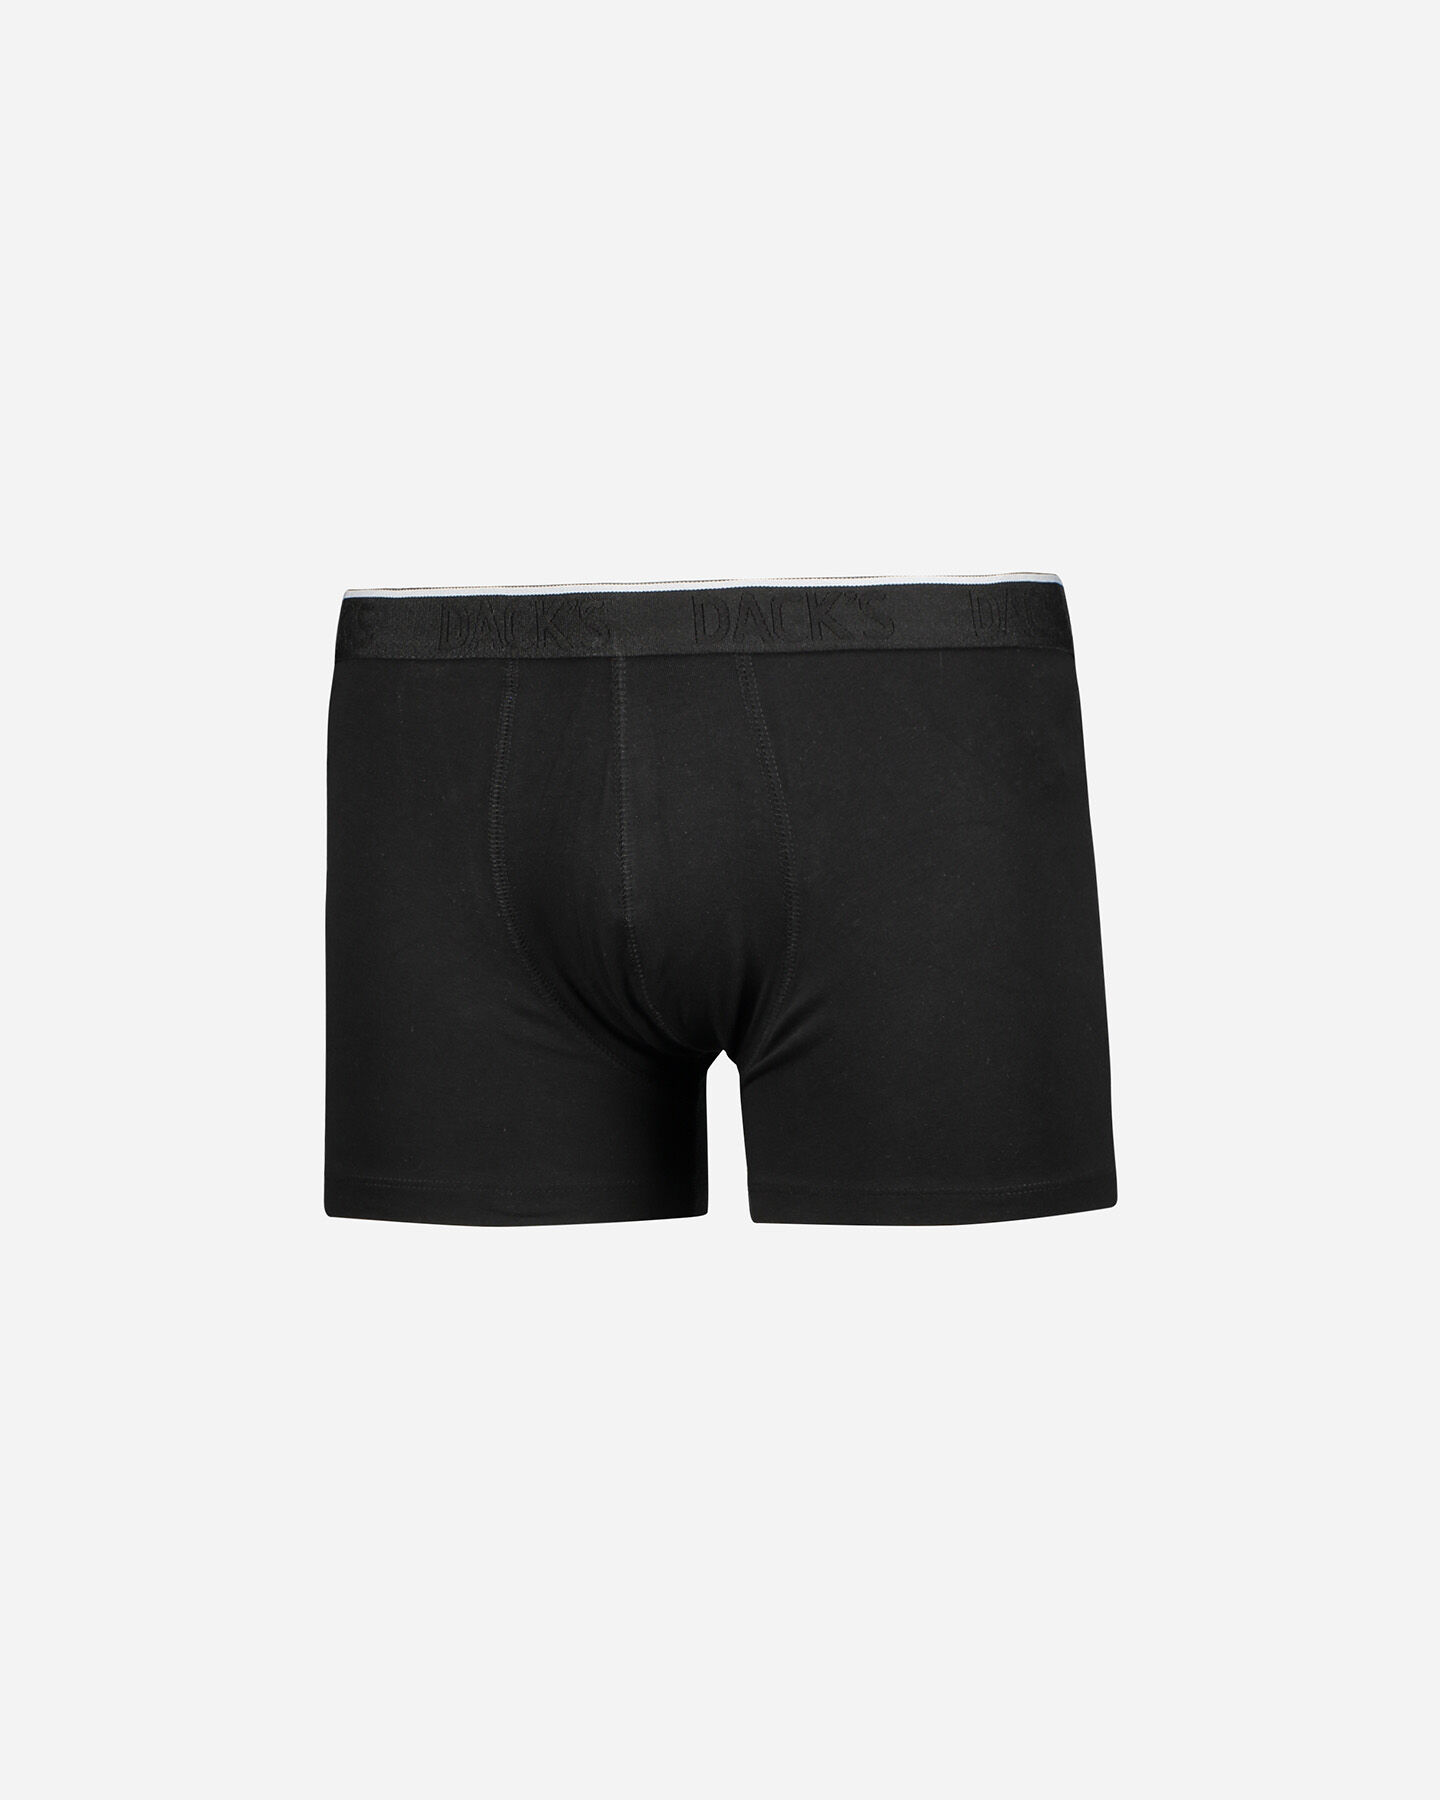  Intimo DACK'S BIPACK BASIC BOXER M S4061962 scatto 2